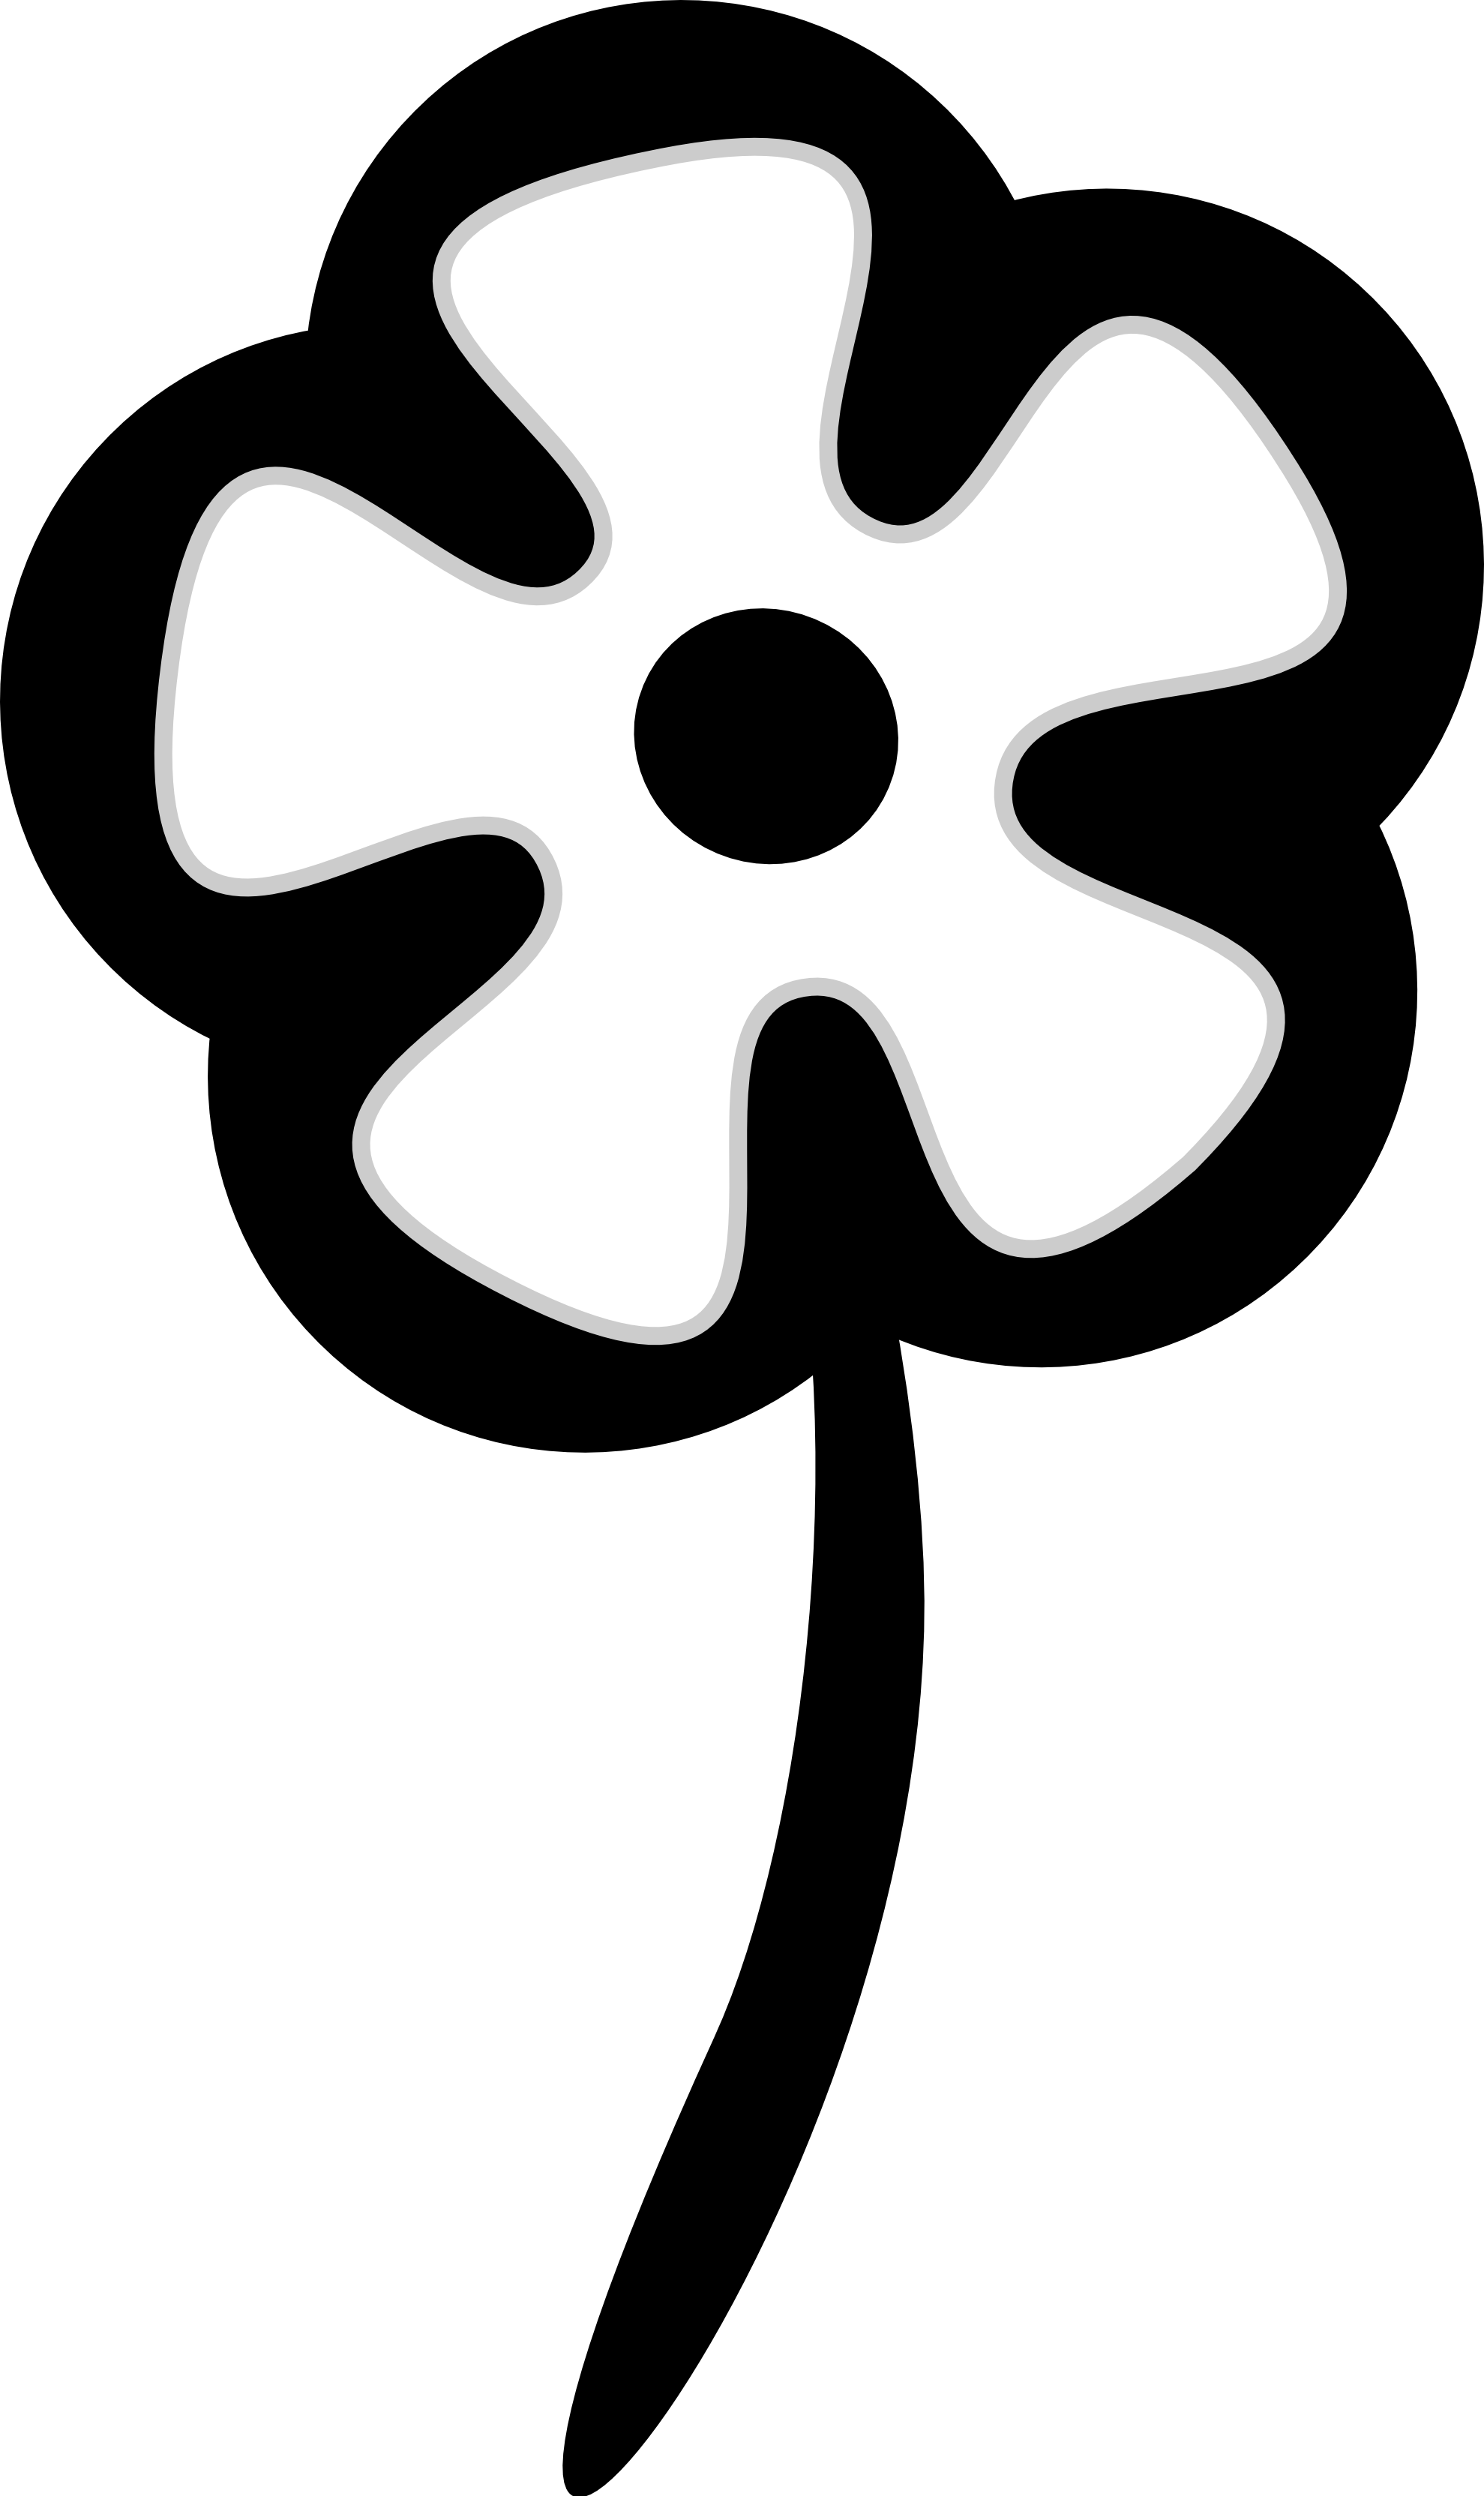 Flower black and white flowers black and white clip art image